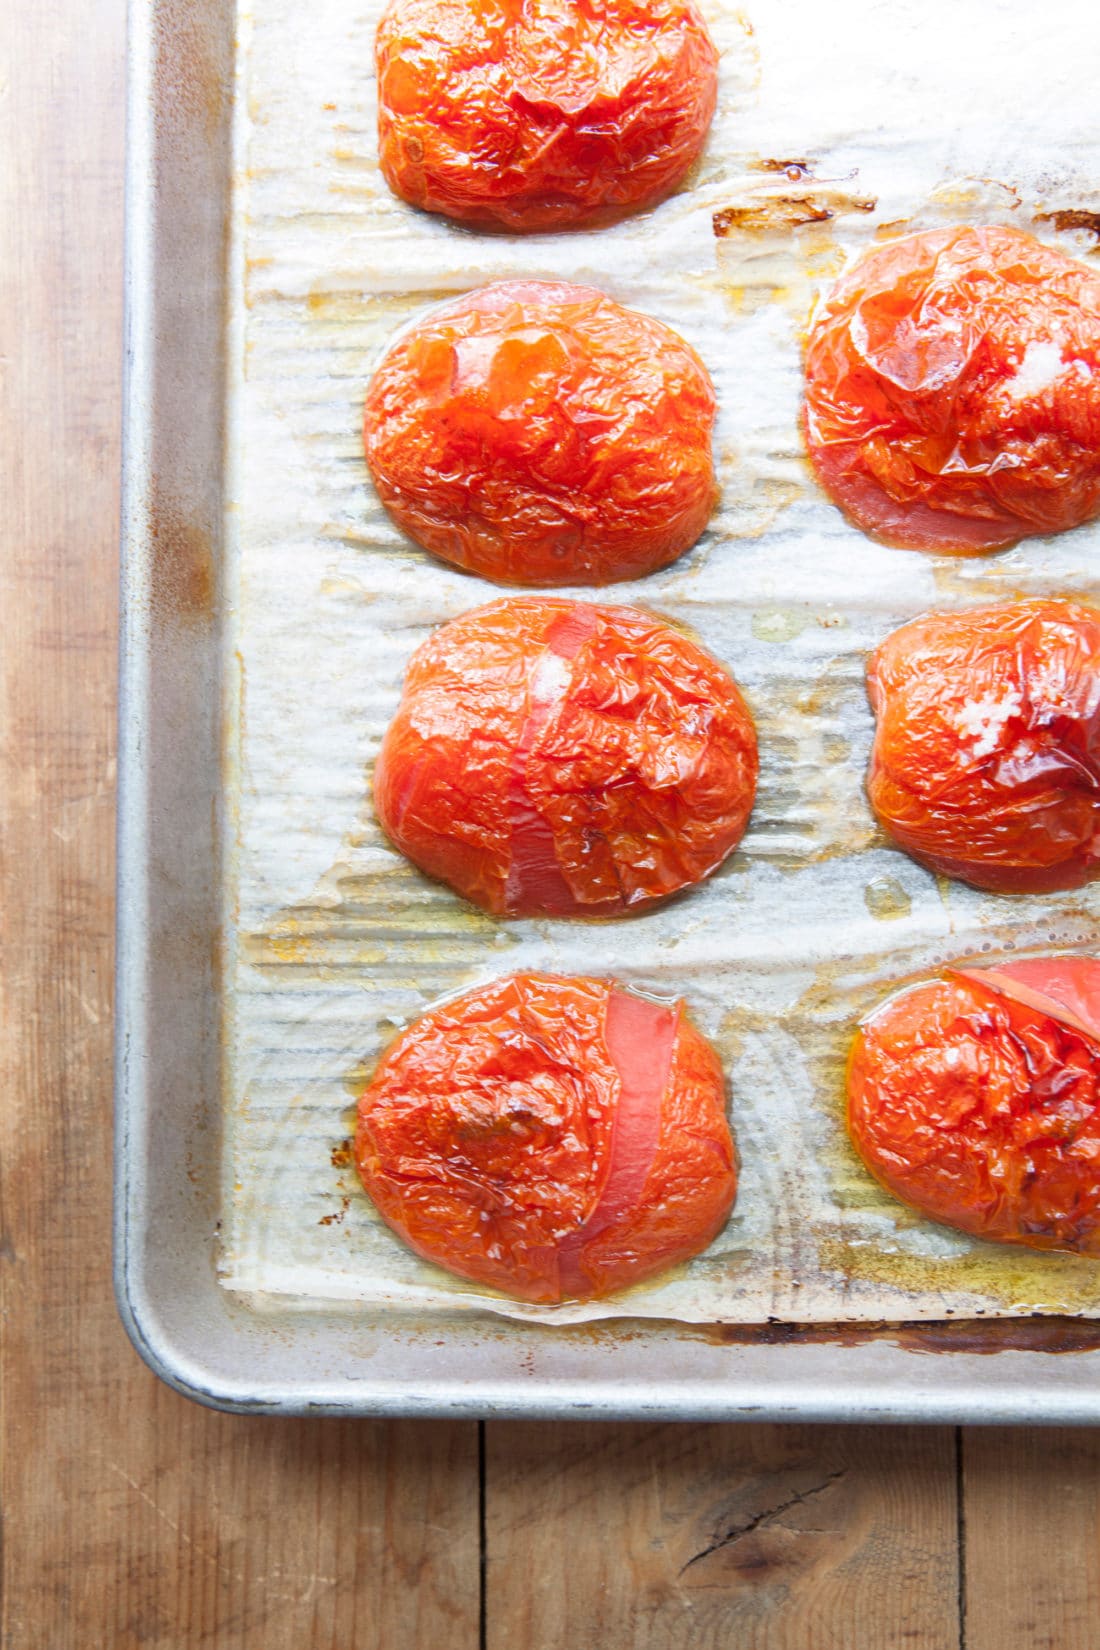 Roasted Tomatoes on a lined baking sheet.